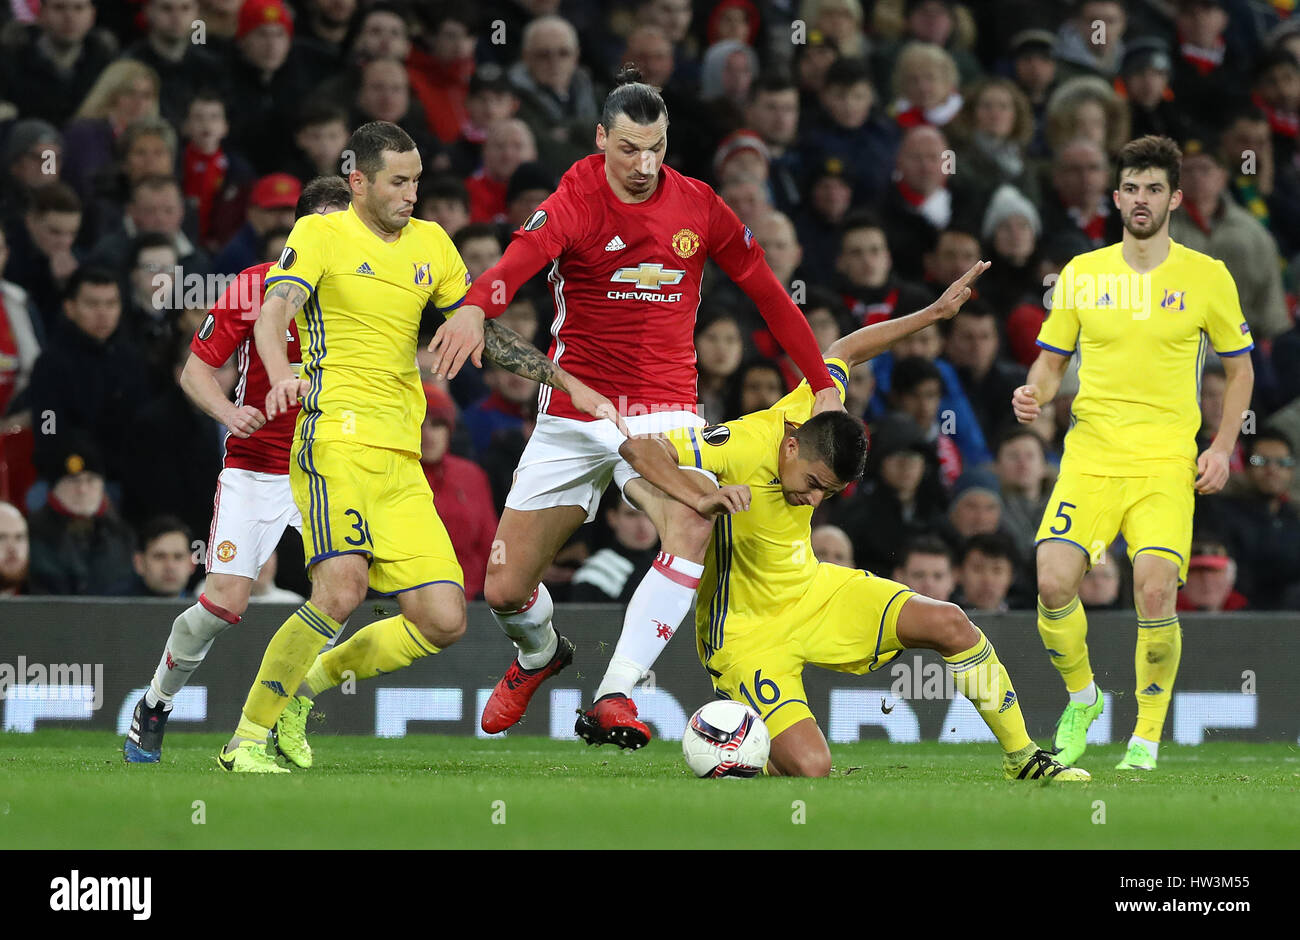 Manchester United's Zlatan Ibrahimovic is tackled by FC Rostov's Fedor Kudryashov and Cristian Noboa during the UEFA Europa League Round of Sixteen, Second Leg match at Old Trafford, Manchester. Stock Photo